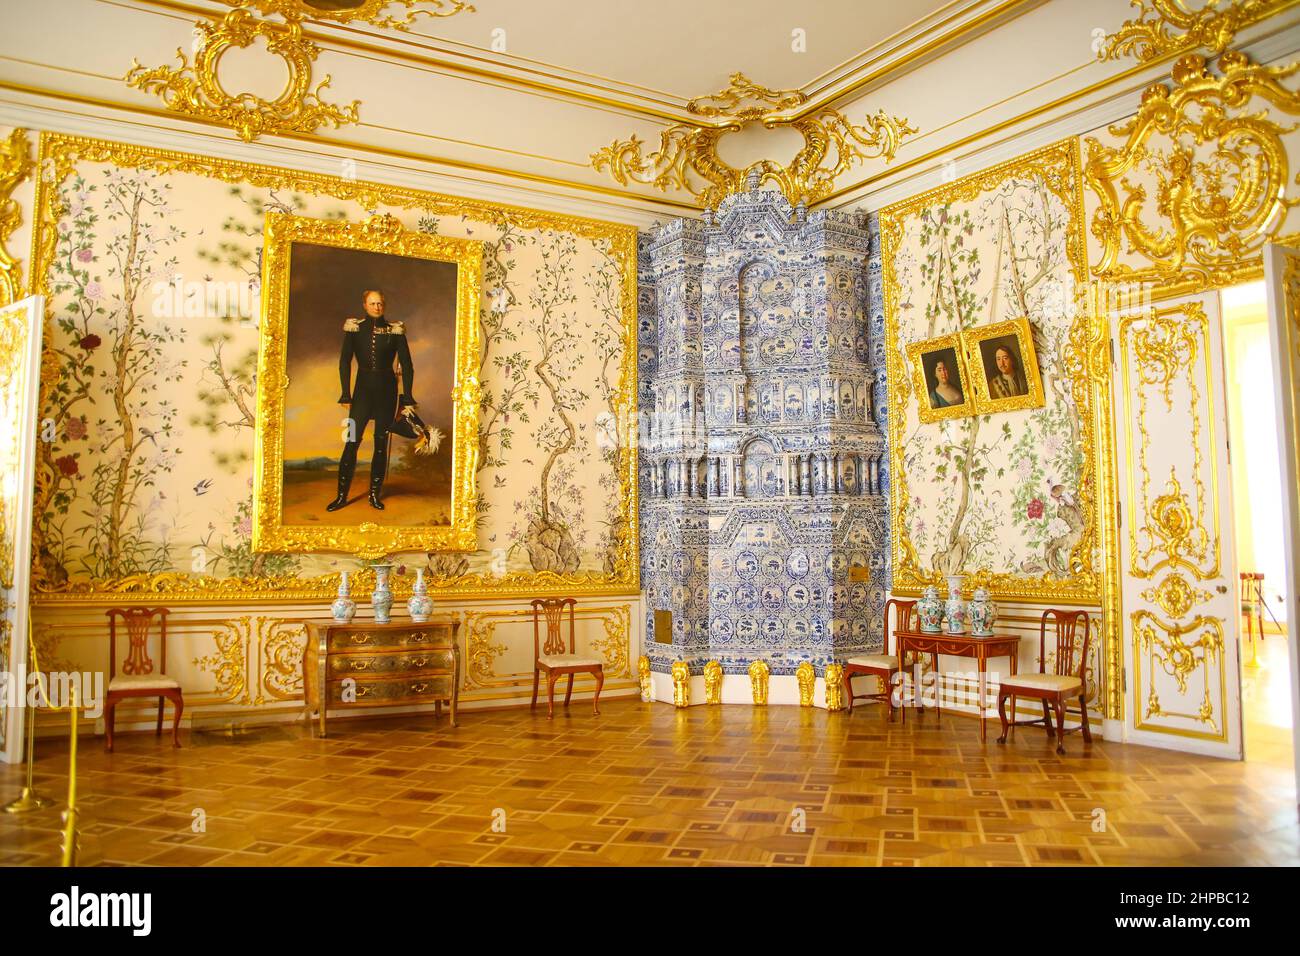 White Dining Room, Catherines Palace, Tsarskoye Selo, Russia. White walls embellished with gold, with blue and white ceramic water heater. Stock Photo